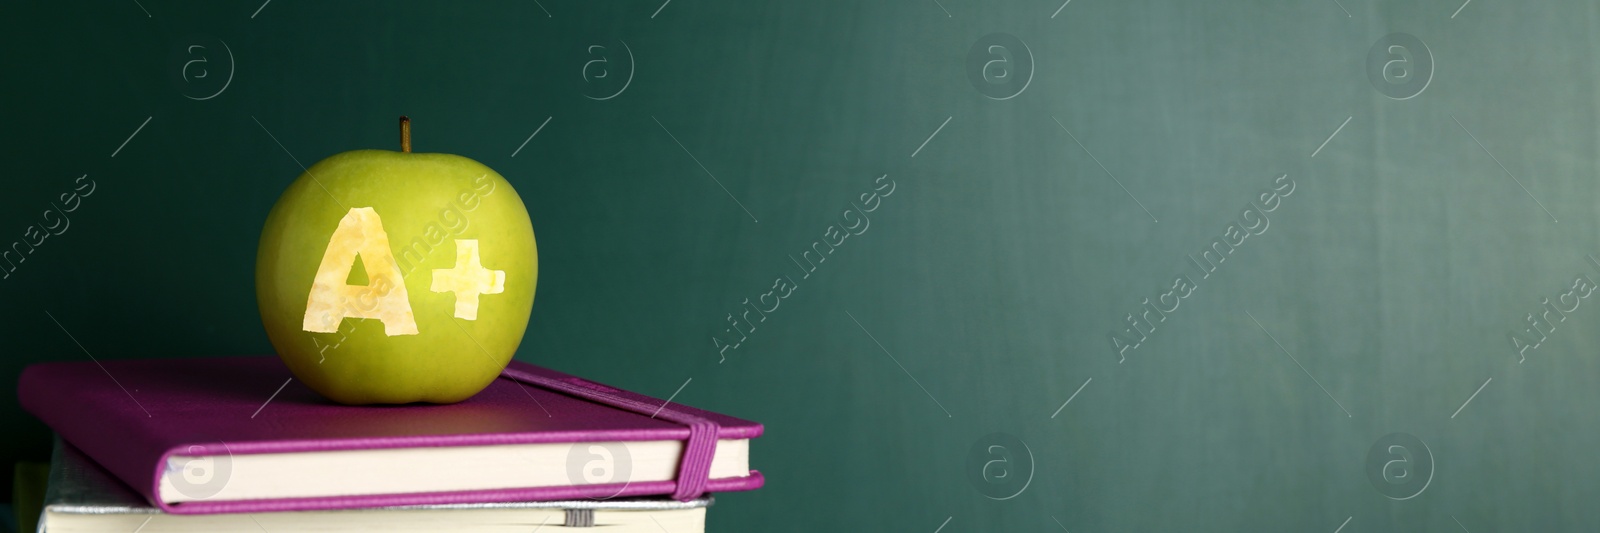 Image of Apple with carved letter A and plus symbol as school grade on books near green chalkboard. Banner design with space for text